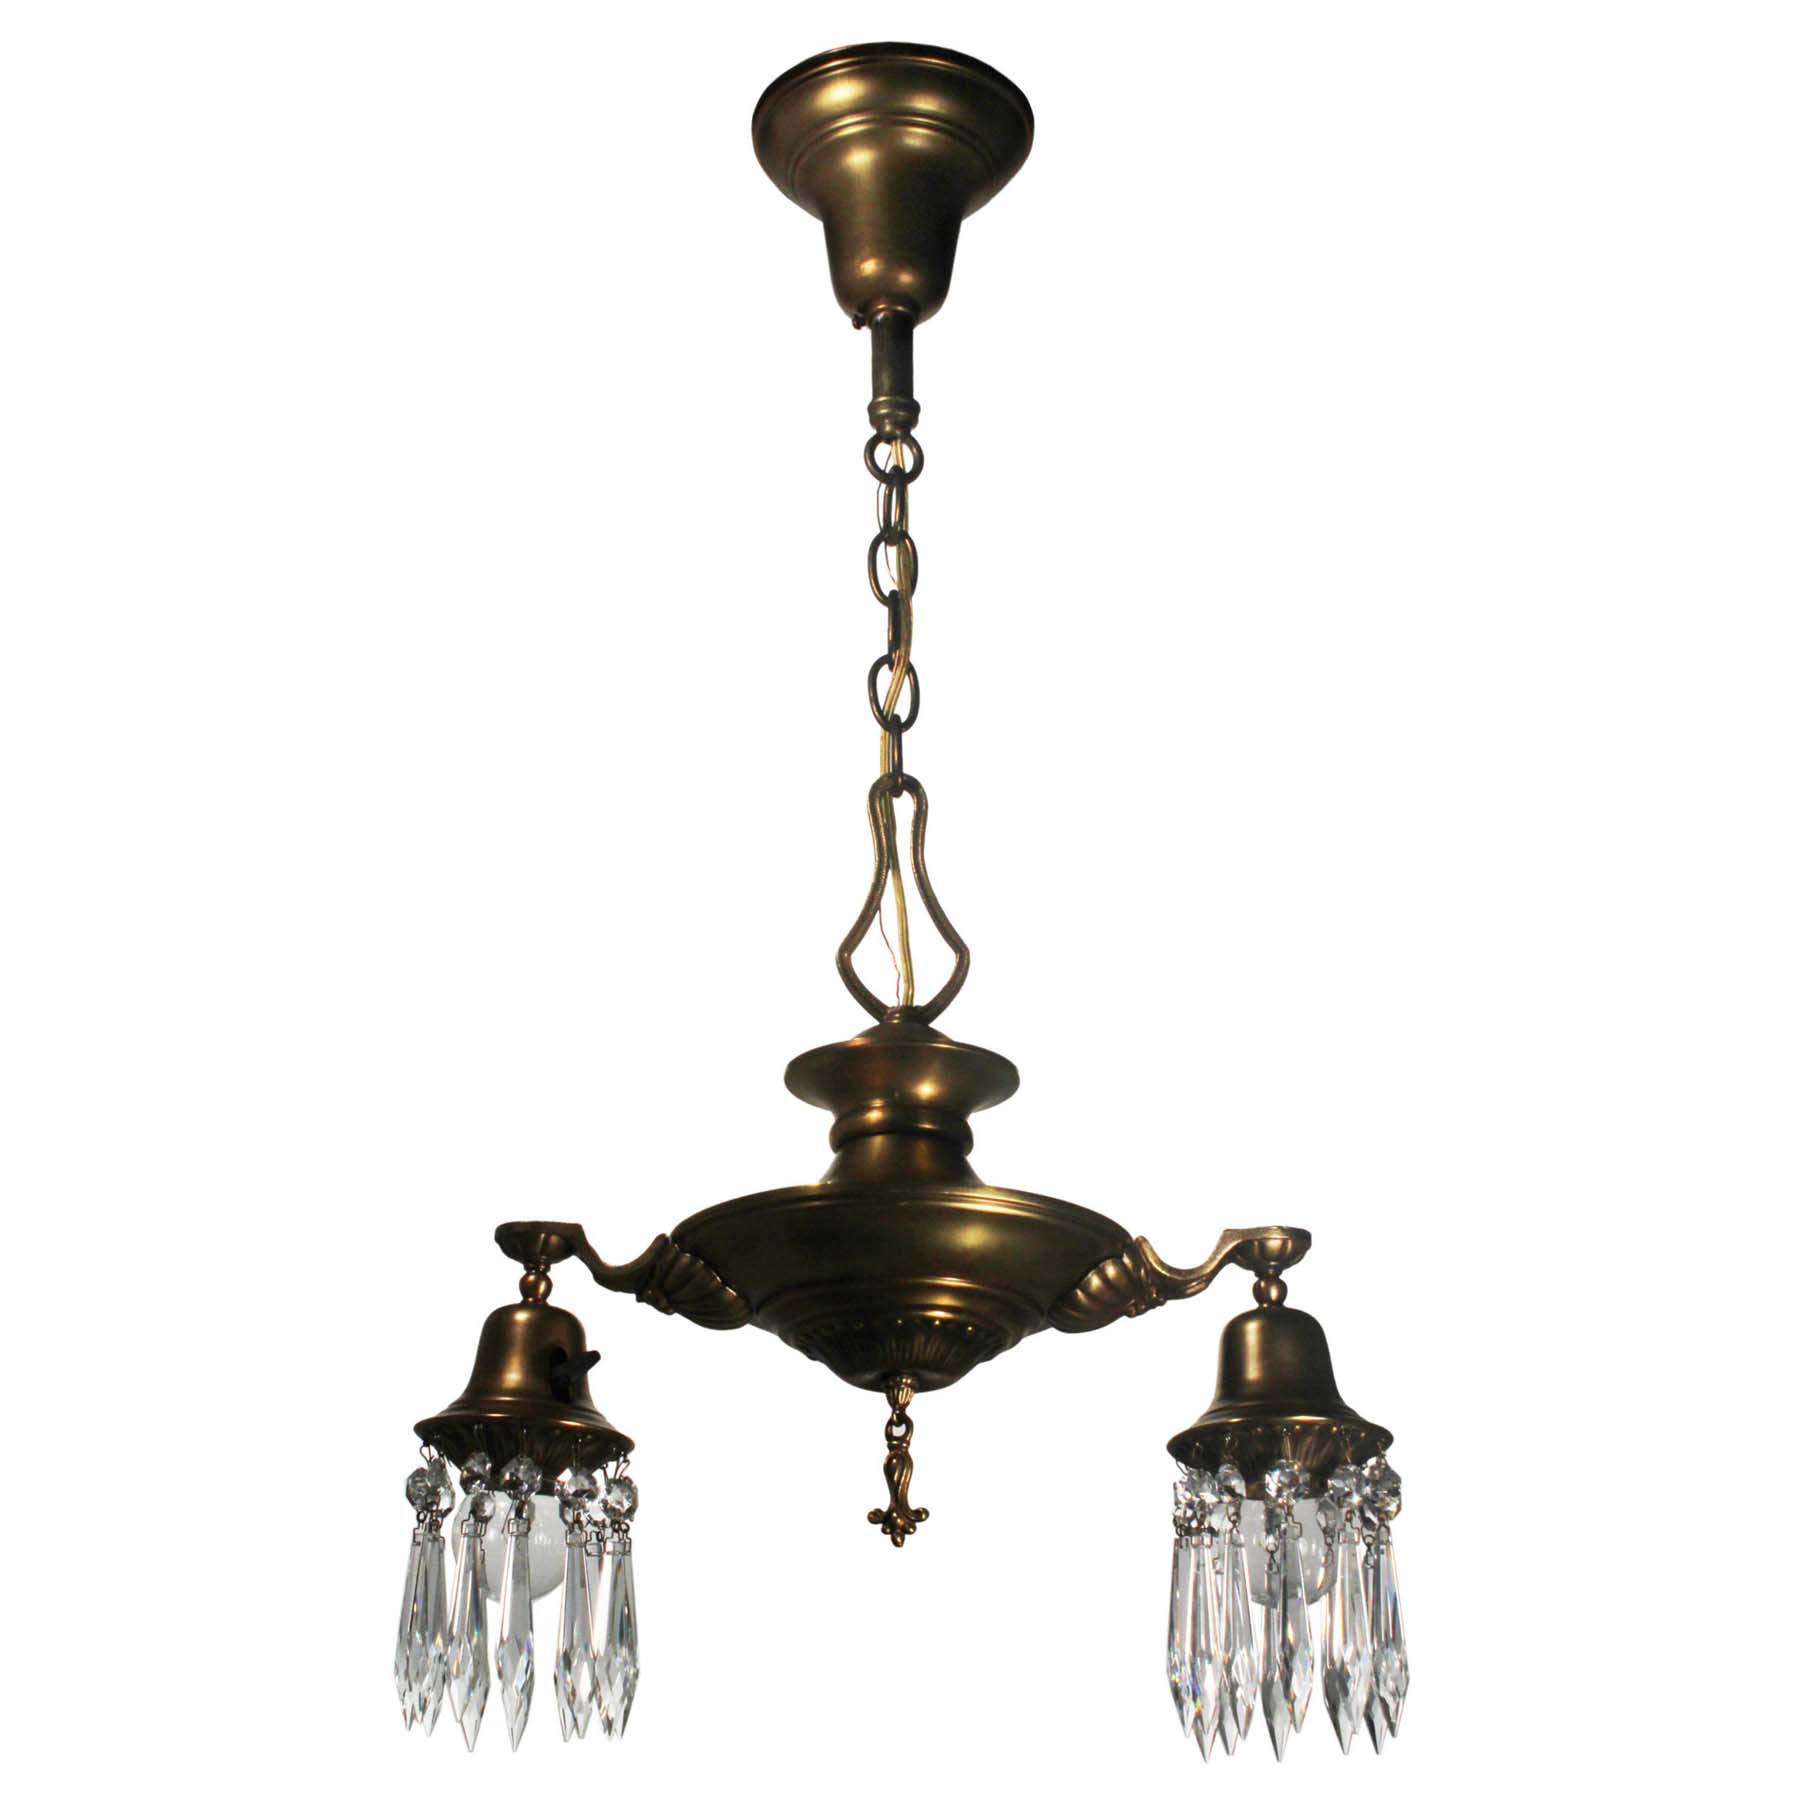 SOLD Brass Two Light Chandelier with Prisms, Antique Lighting-67016